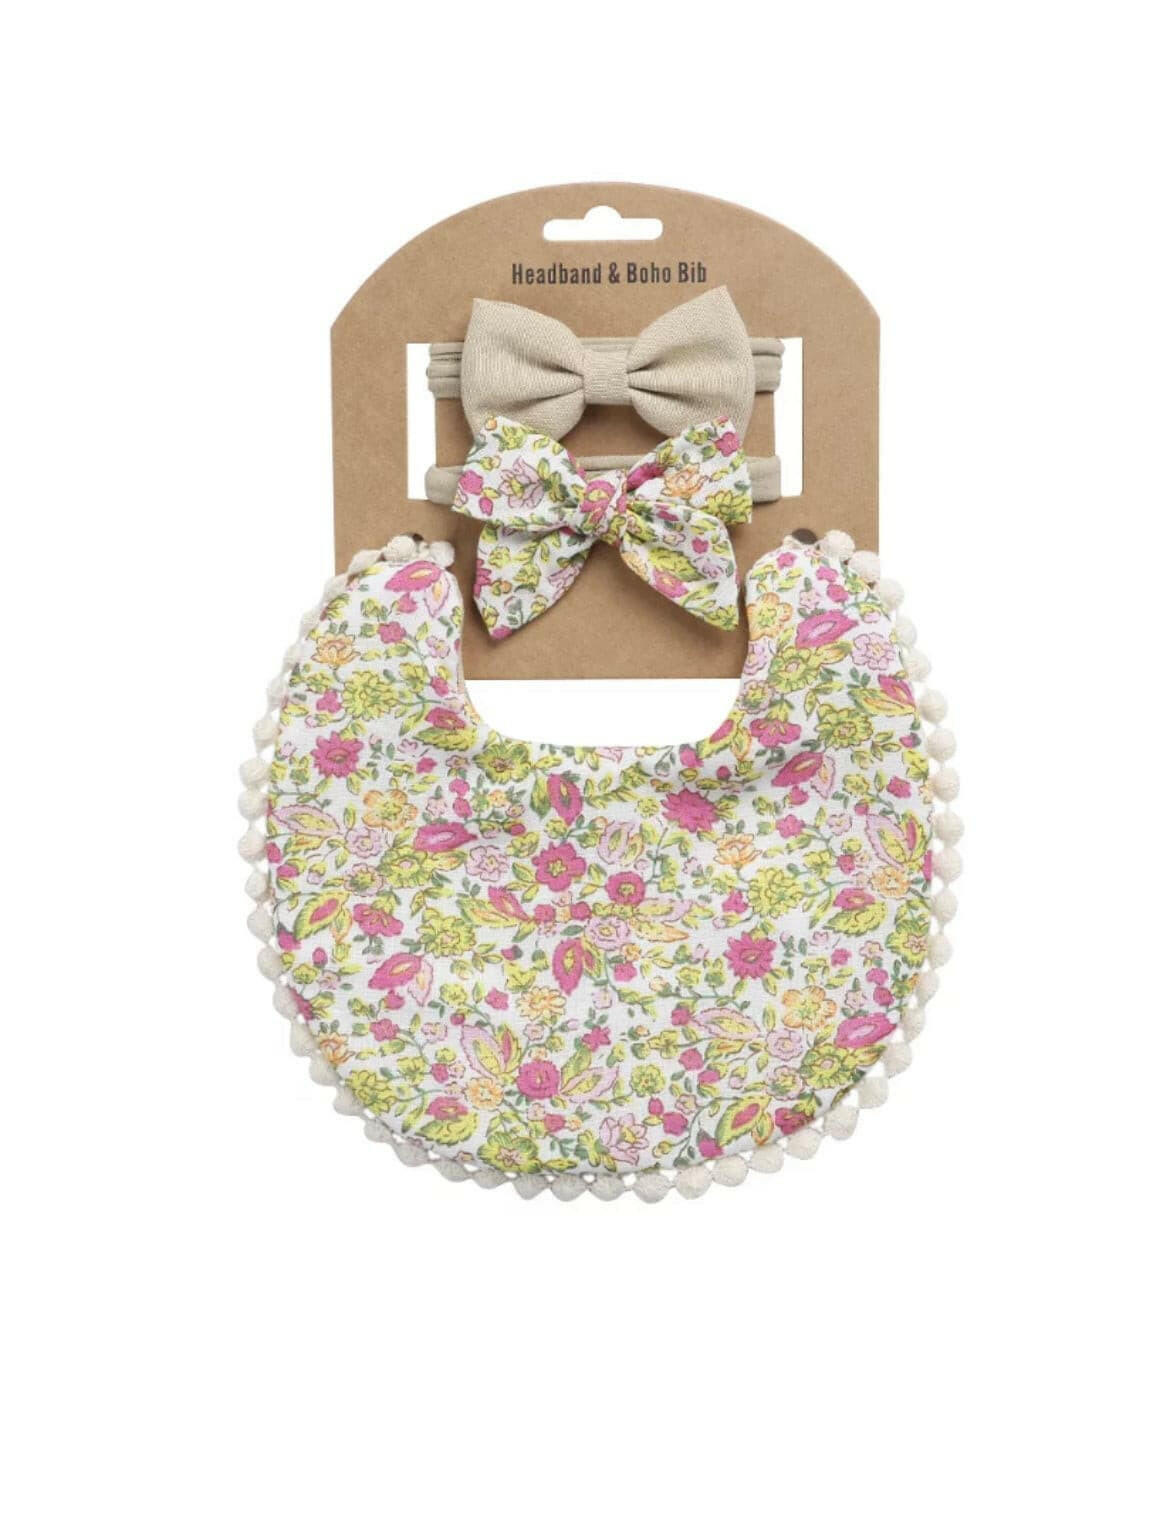 Cotton Double Sided Adjustable Bibs with bandana for baby girl.